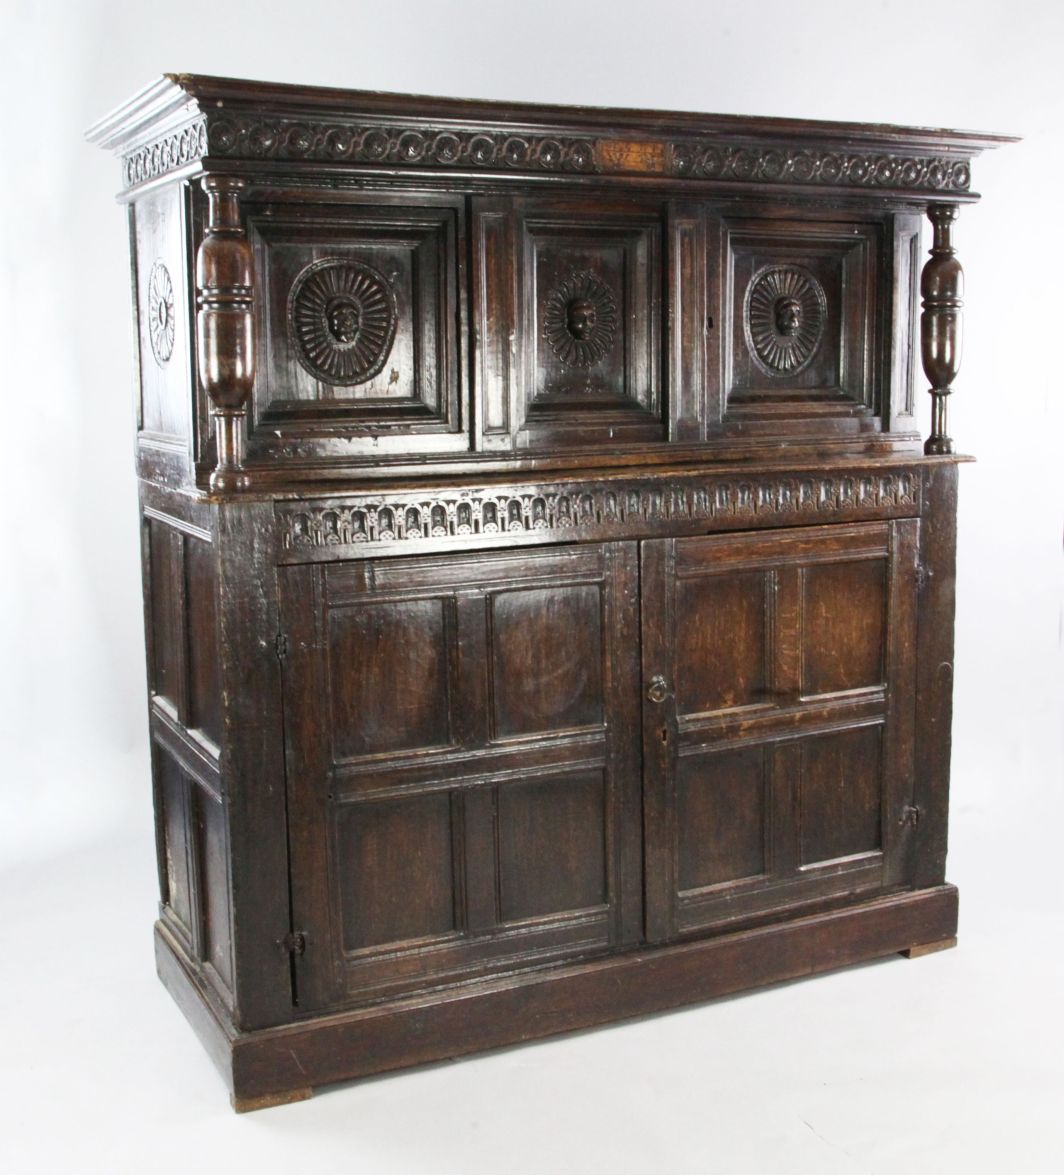 A 17th century carved oak court cupboard, with the date 1611 and initials WW, with cup and cover